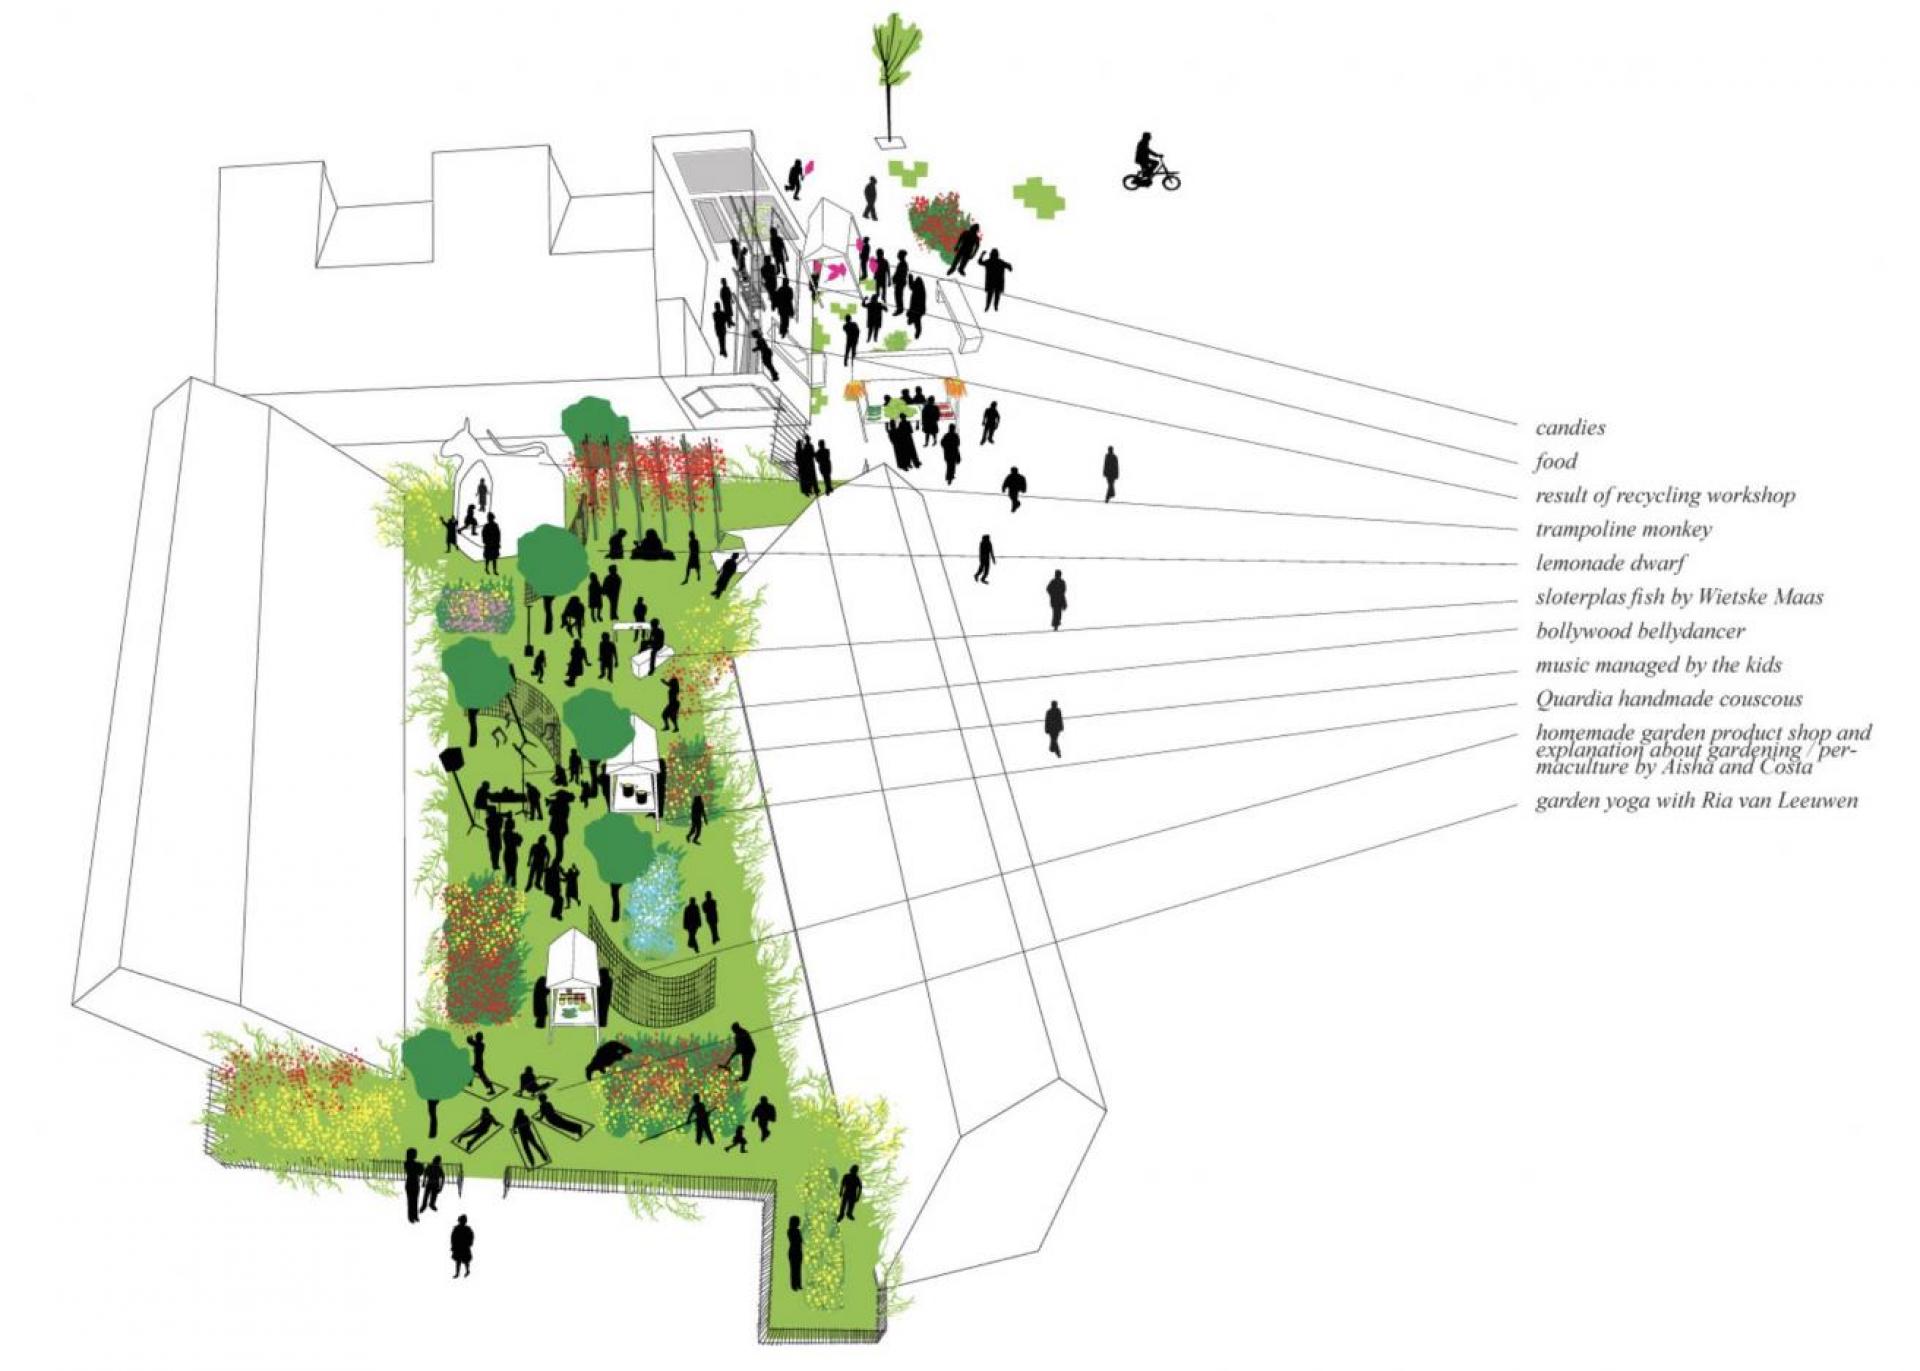 The diagram of the community garden and community kitchen in Amsterdam. | Diagram © OOZE